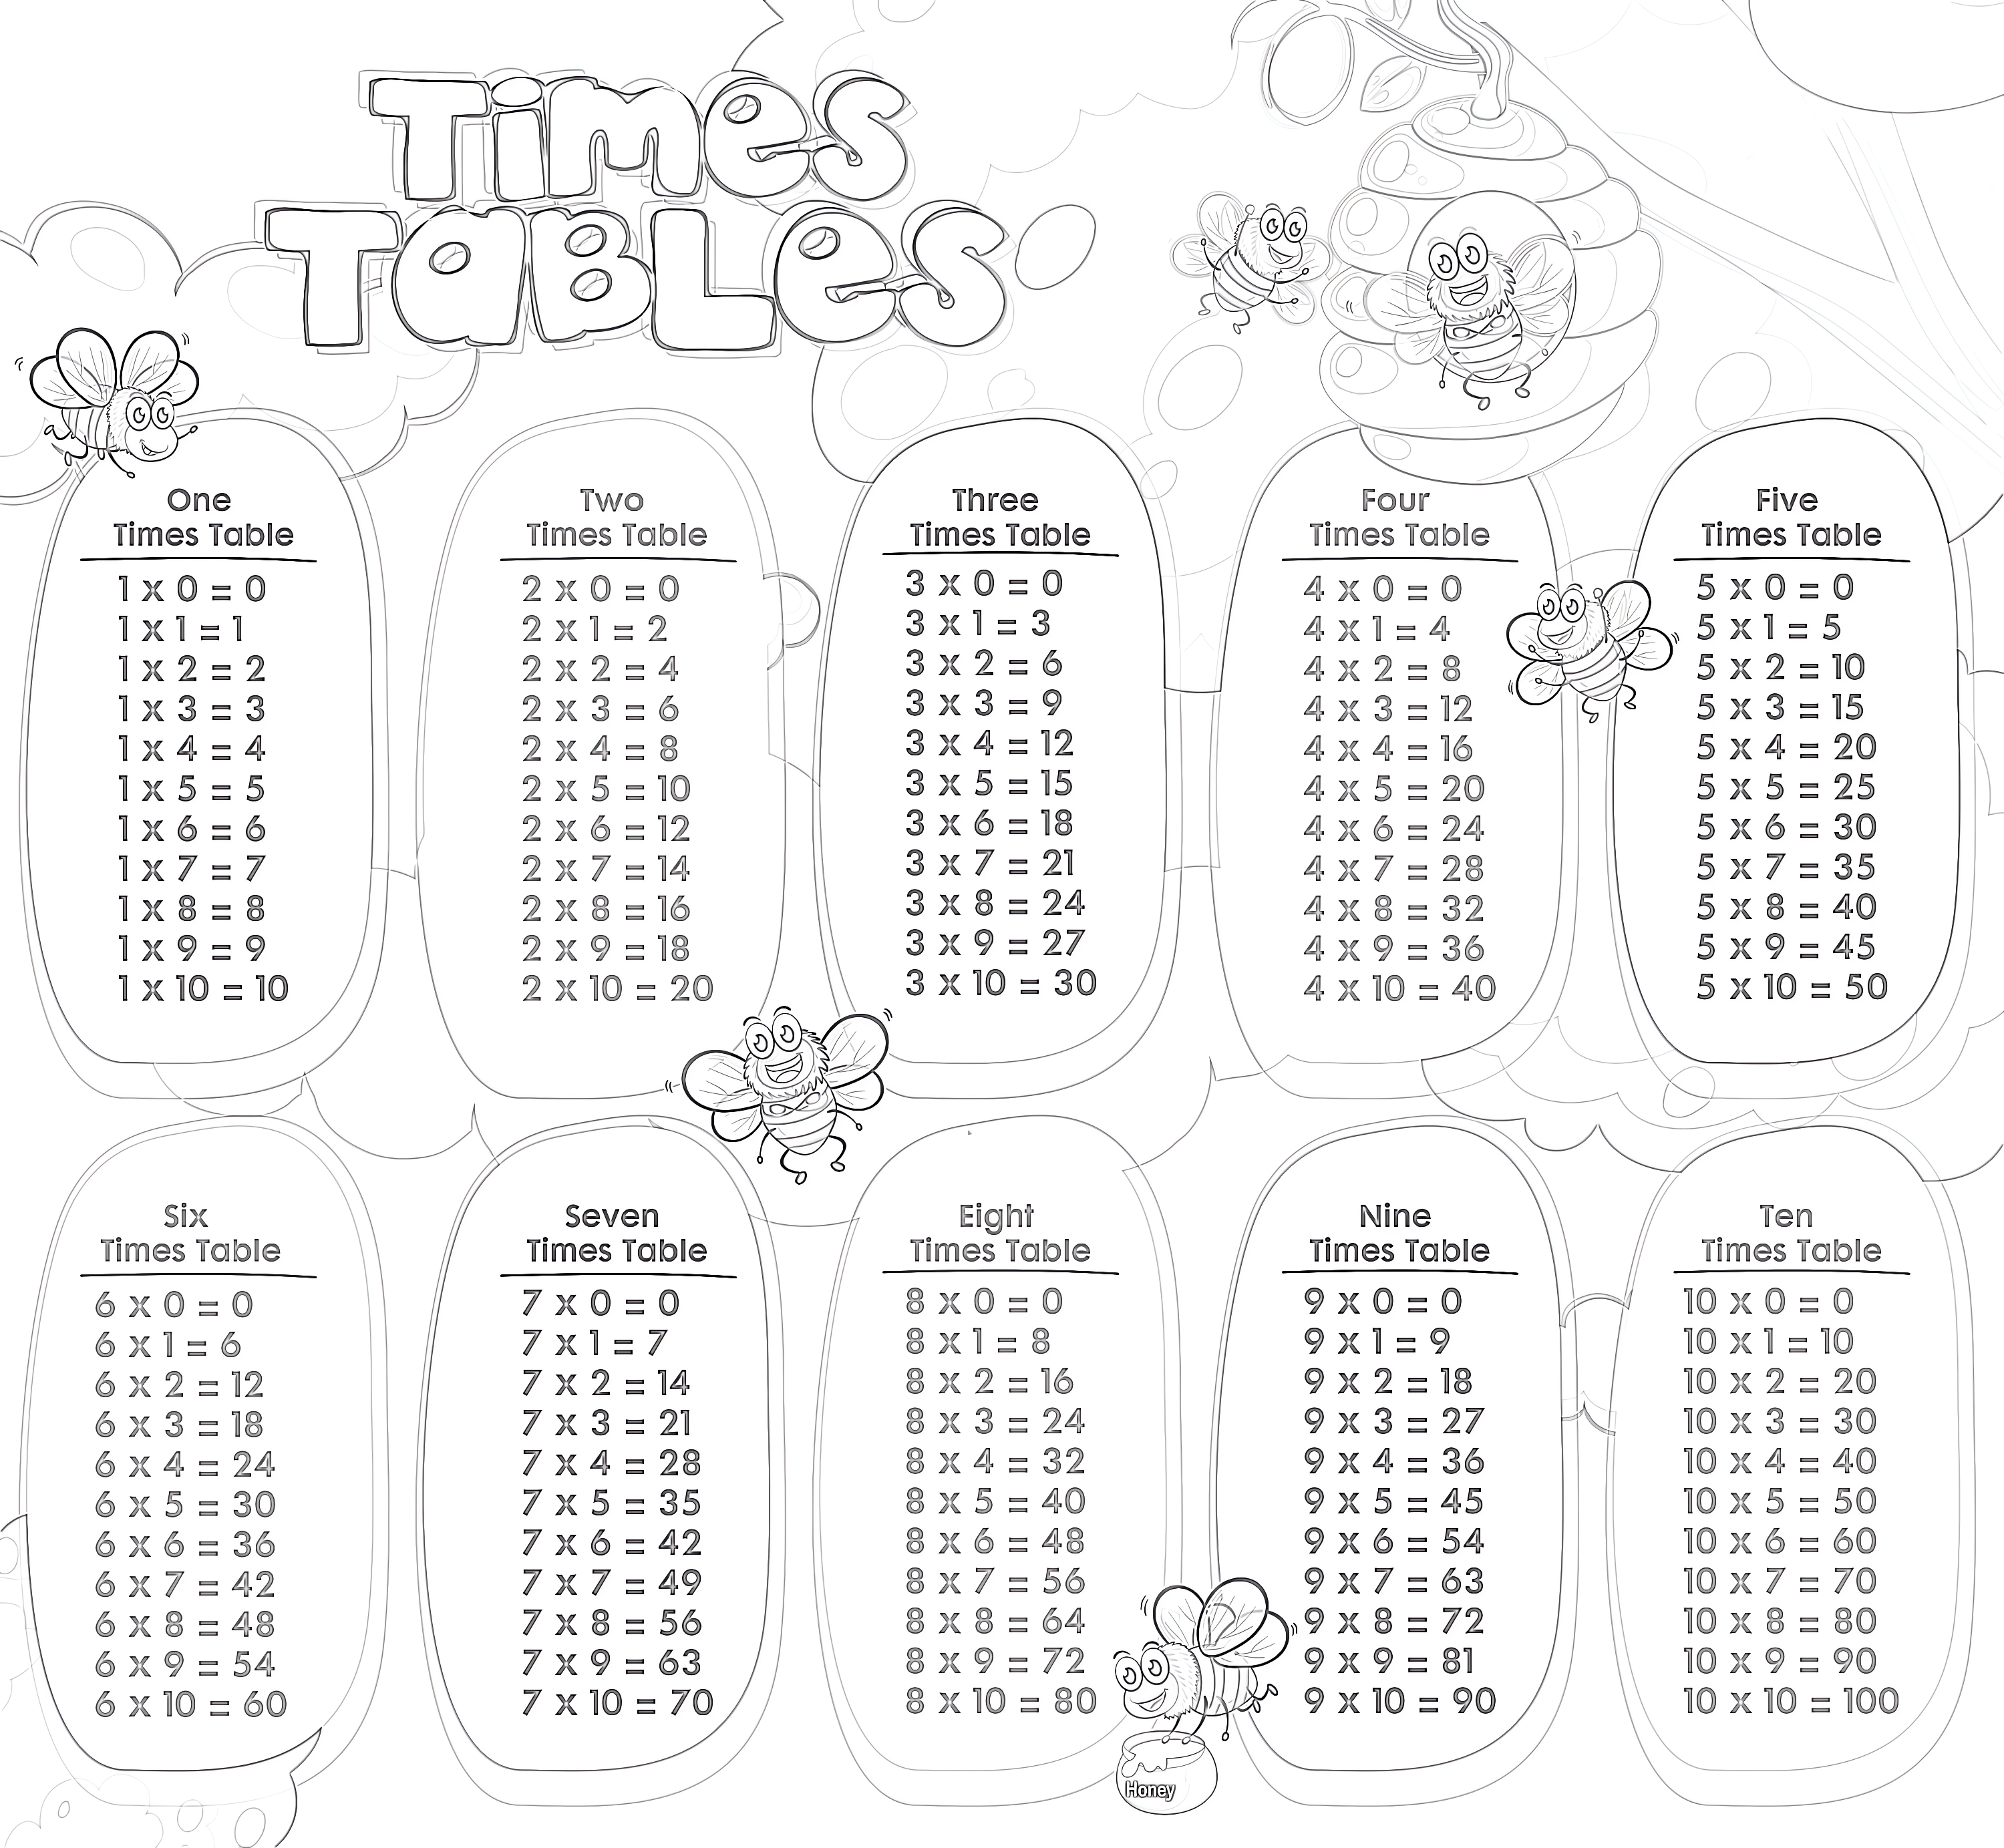 Times Tables With Bees Flying - Coloring page